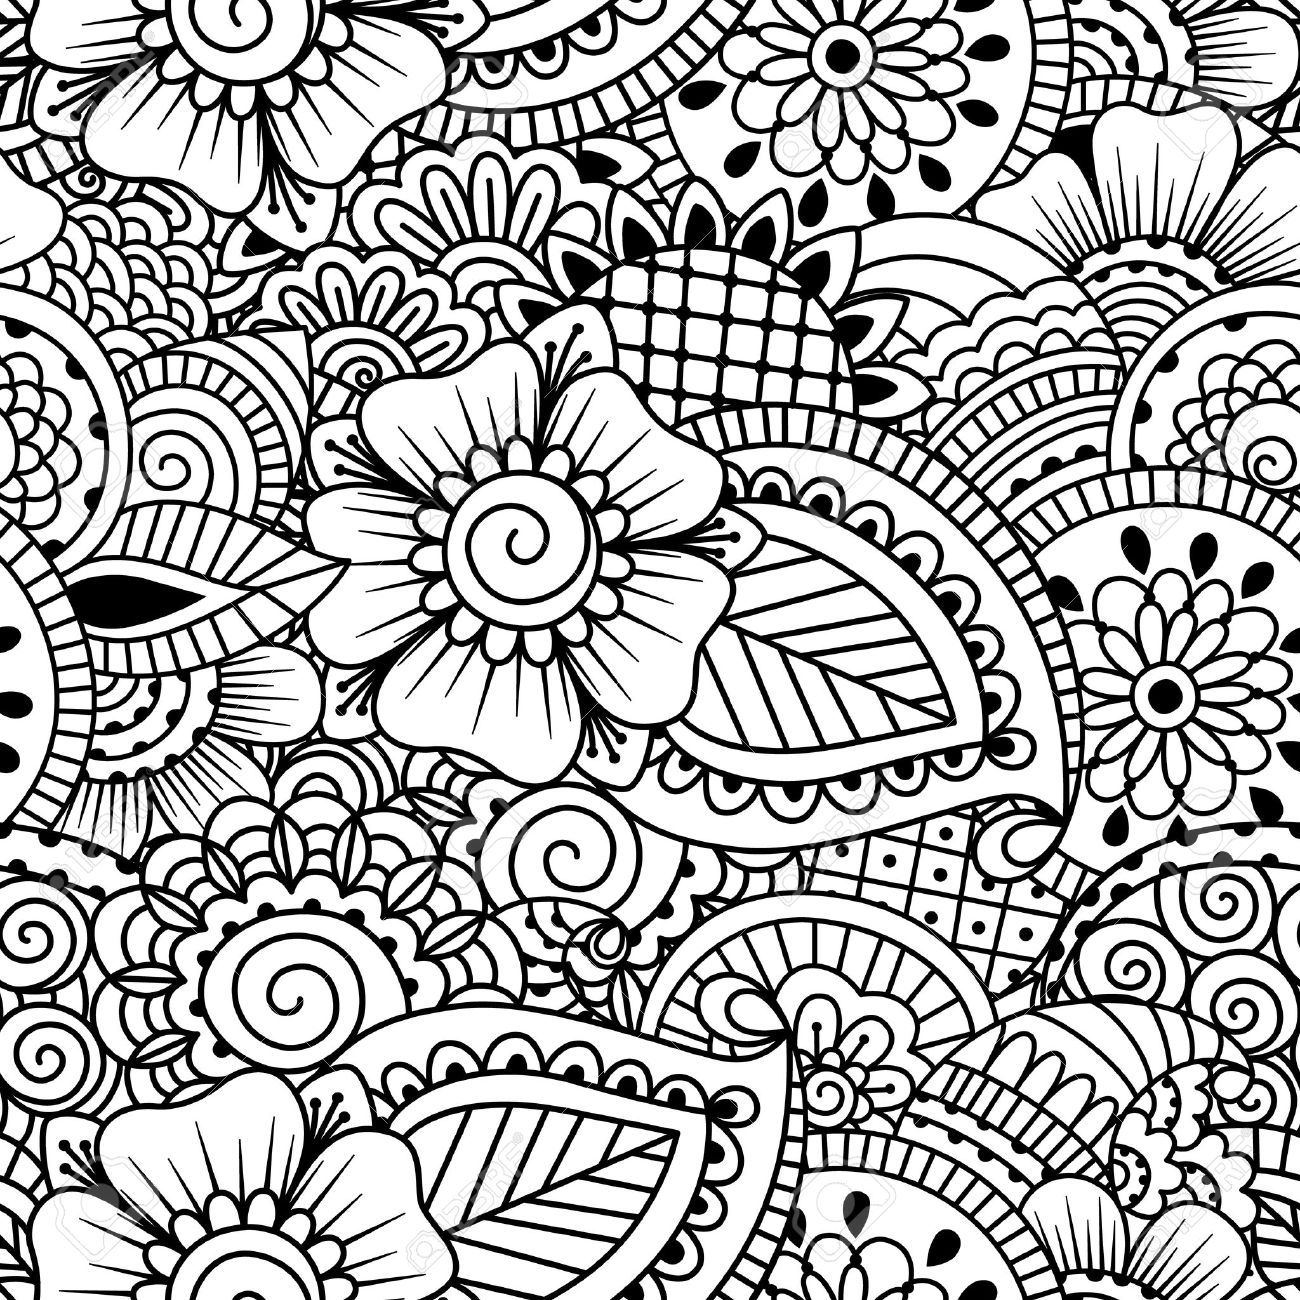 647 Simple Henna Coloring Pages for Adult